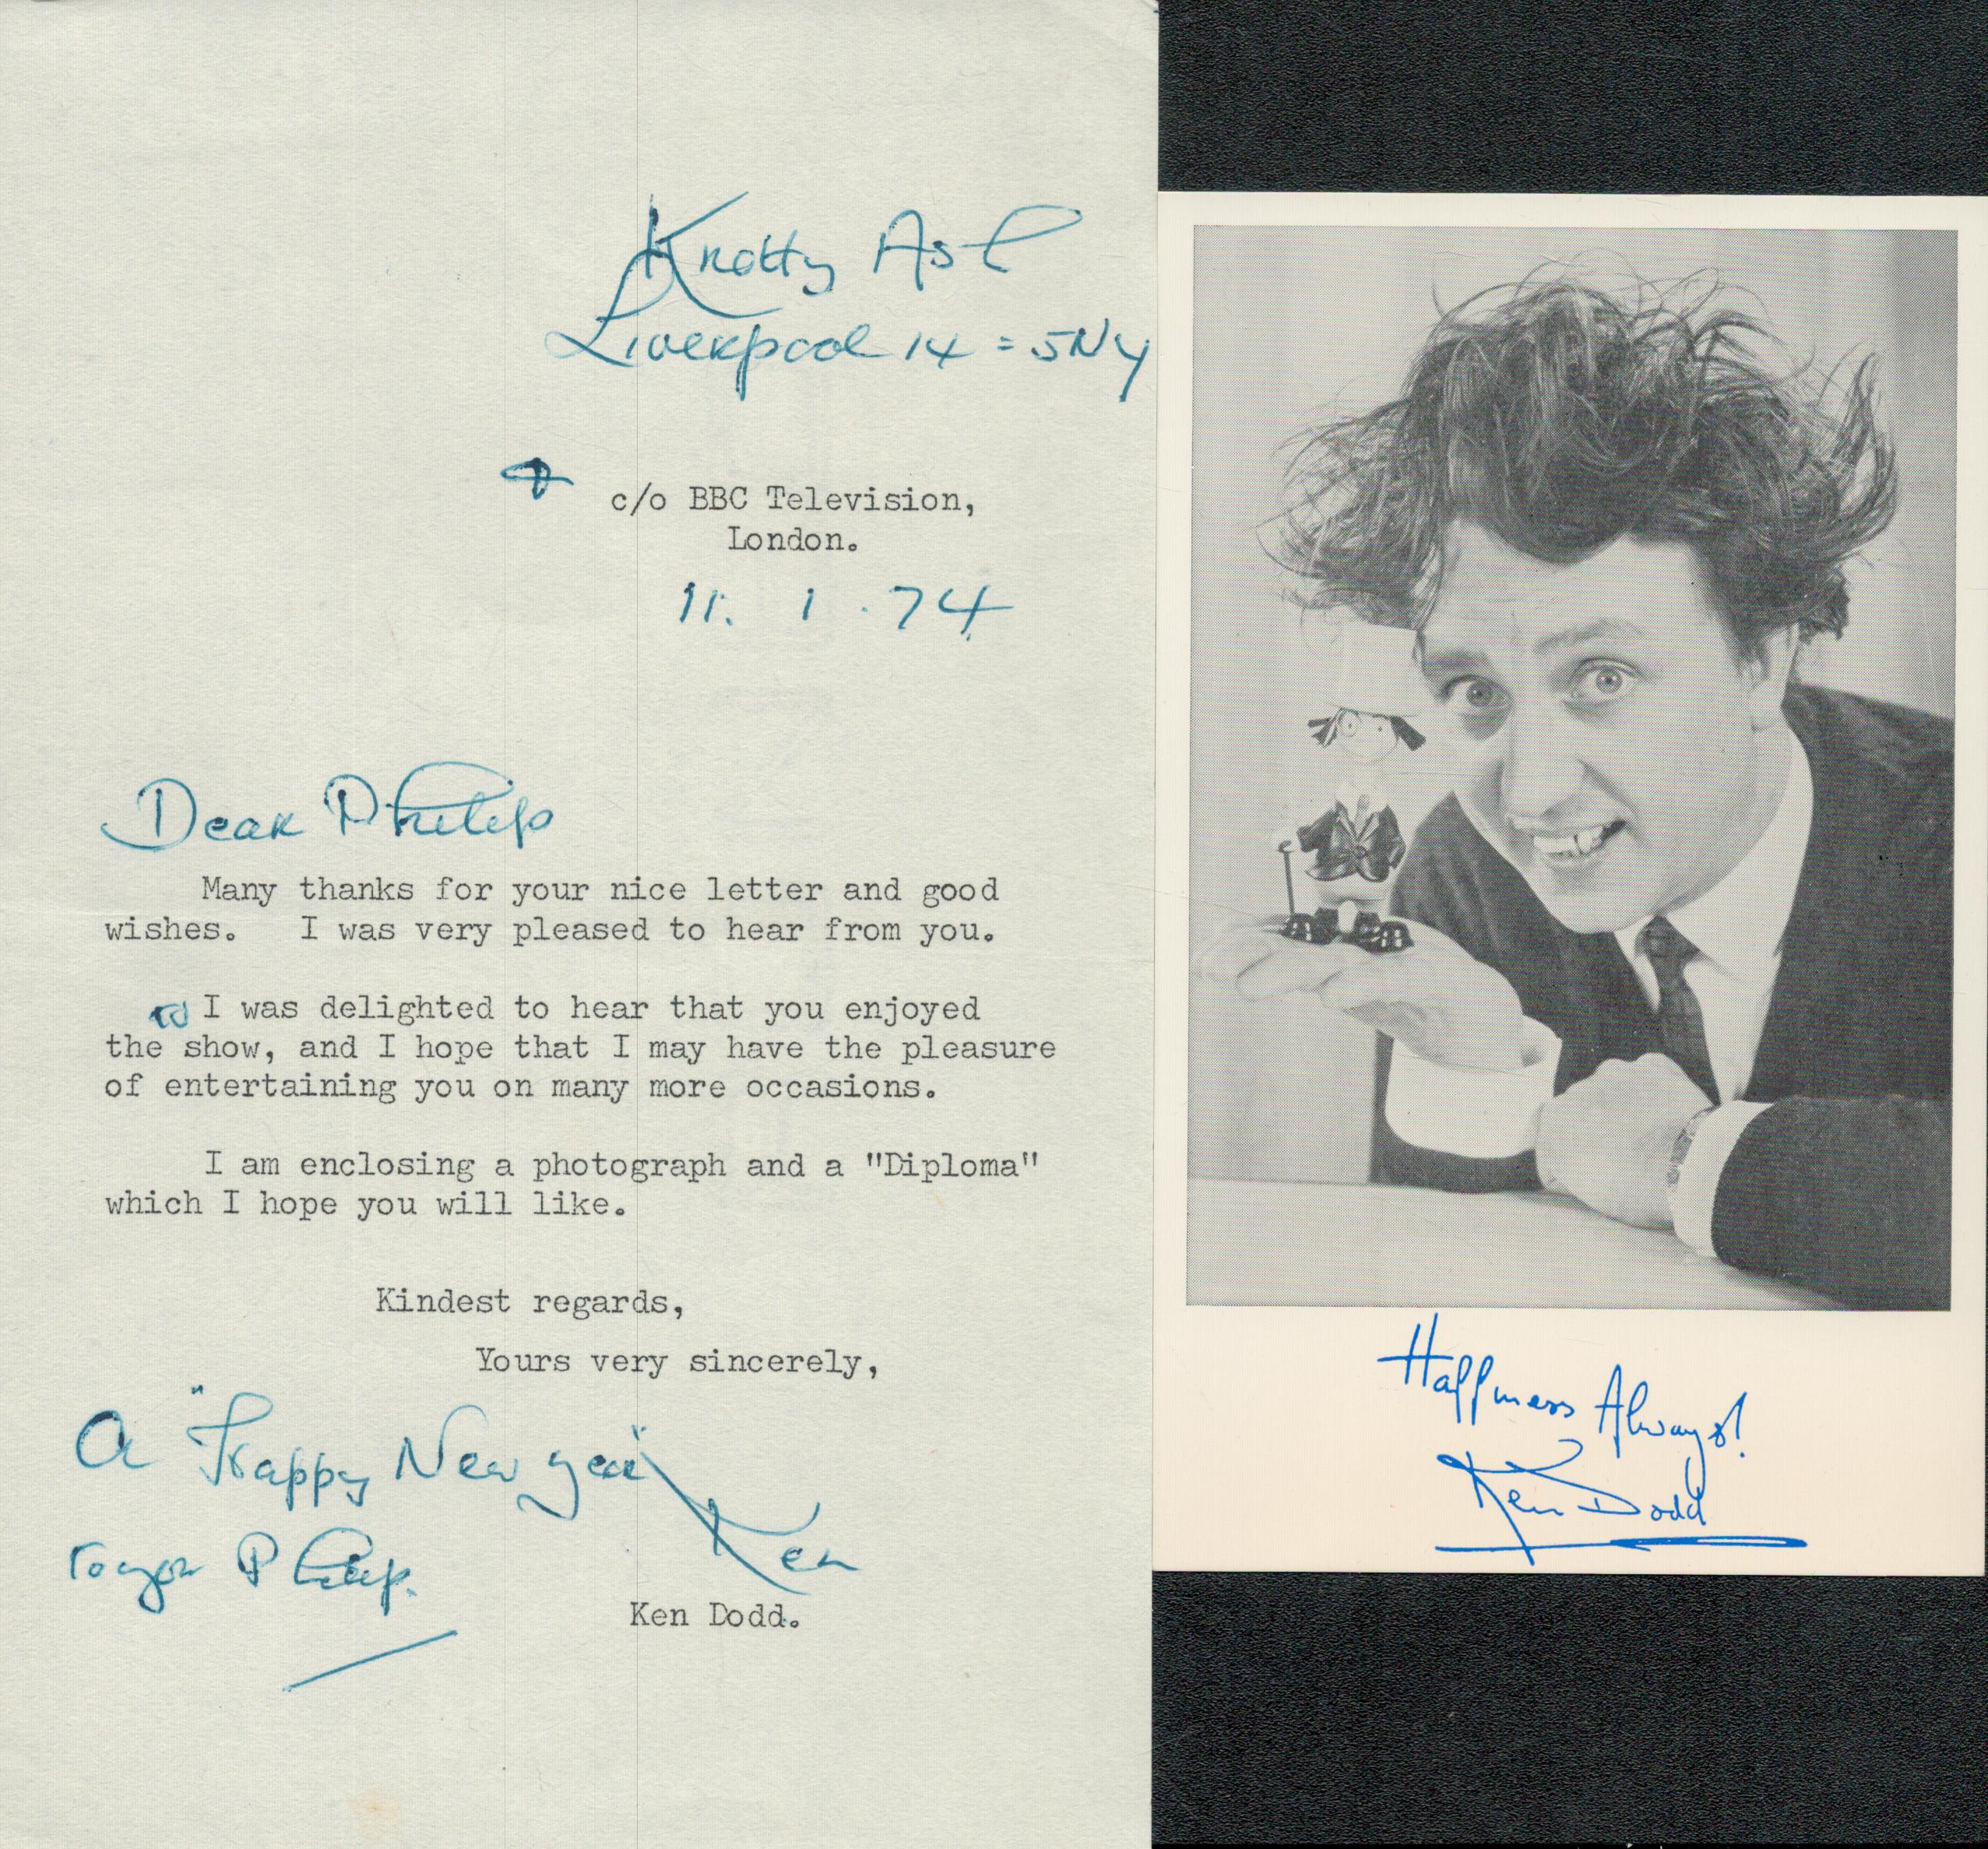 Ken Dodd signed black & white photo Approx. 6x3.5 Inch plus TLS Thank you letter dated 11.1.74.